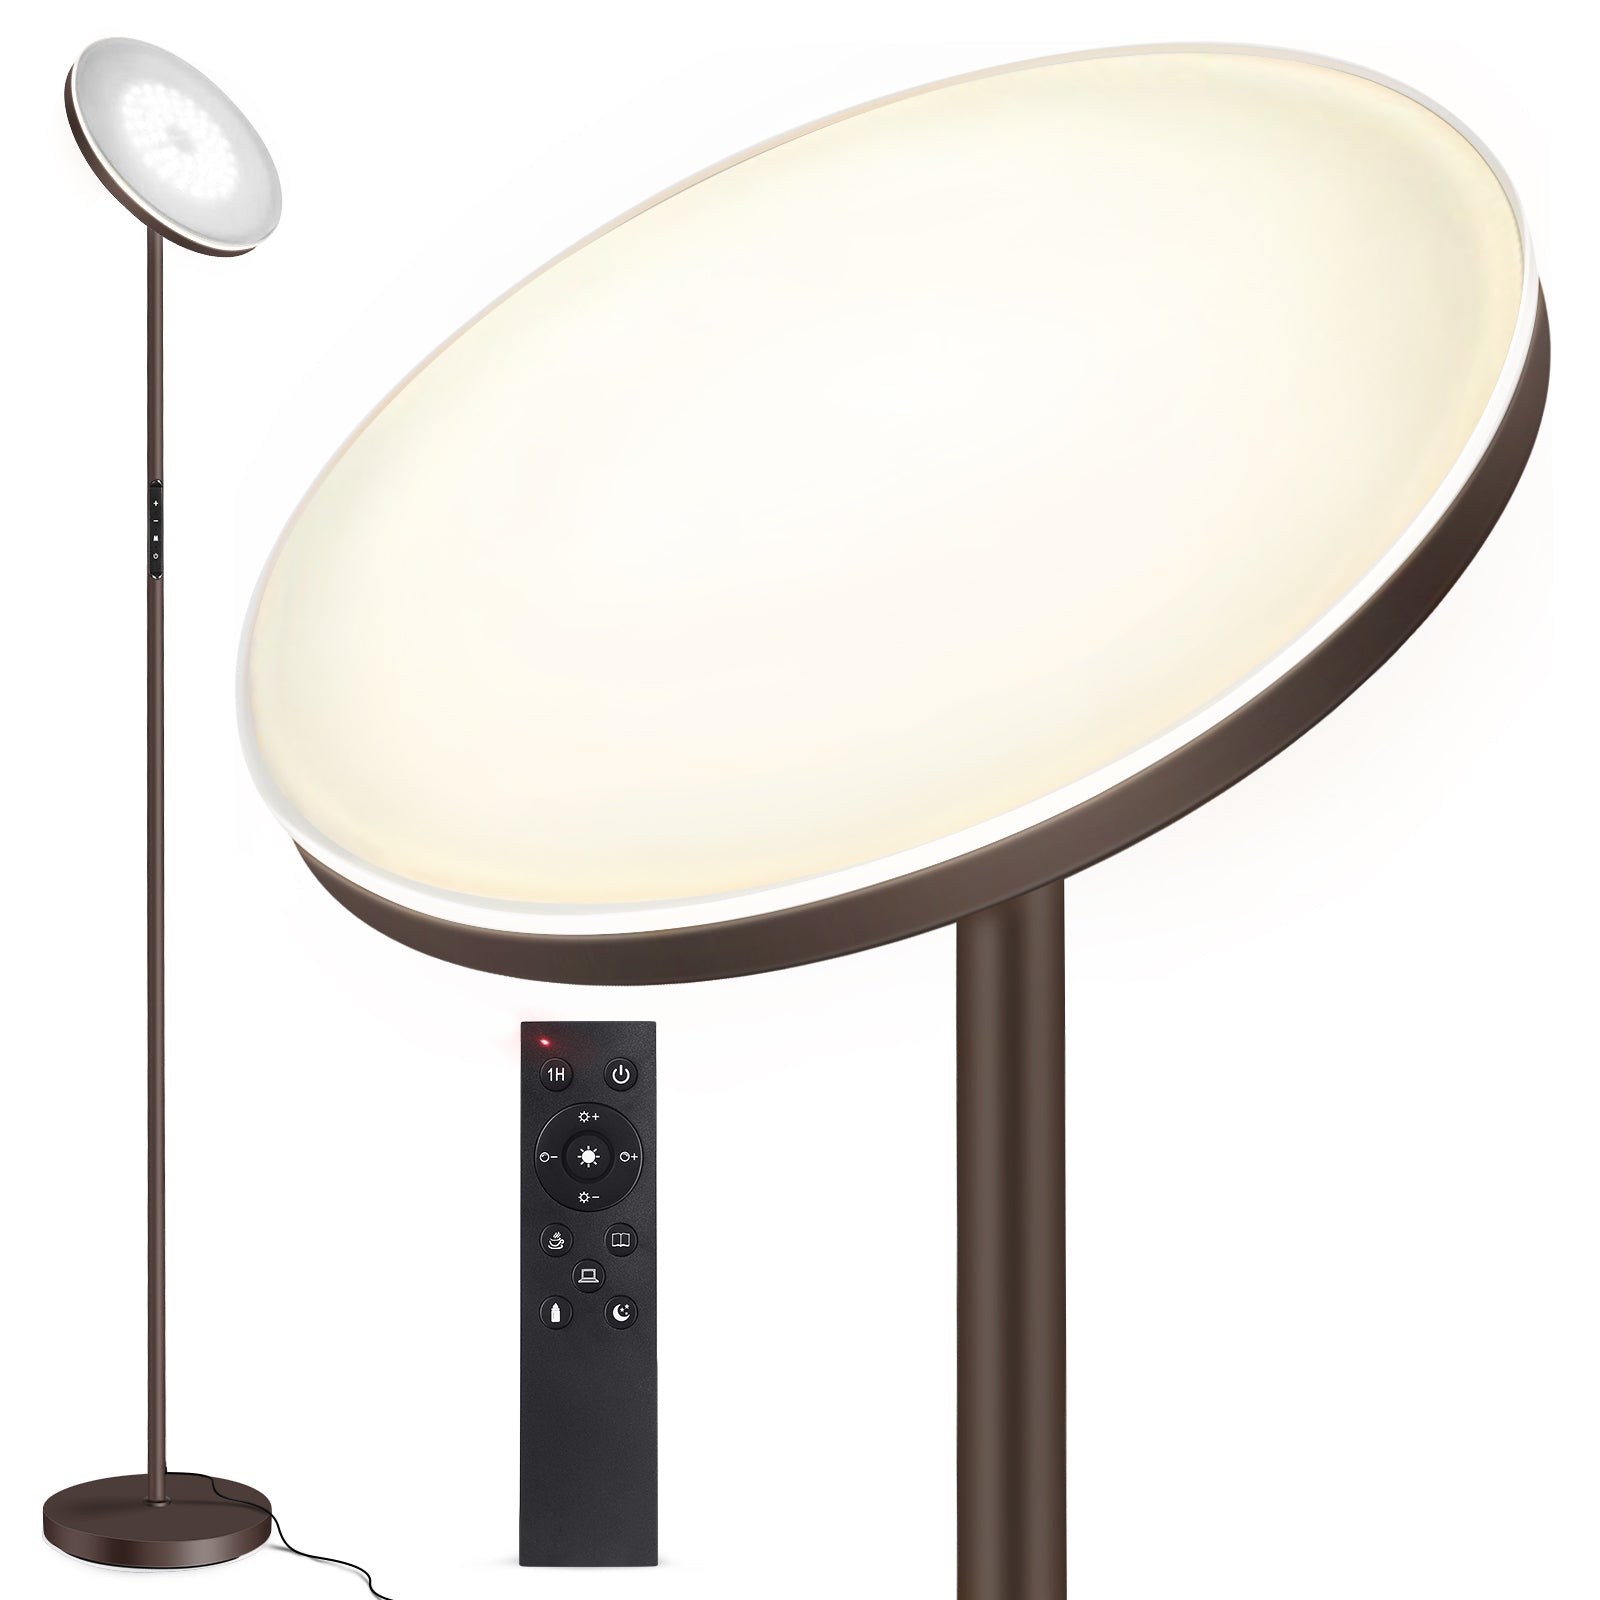 OUTON 30W 2400LM LED Torchiere Floor Lamp